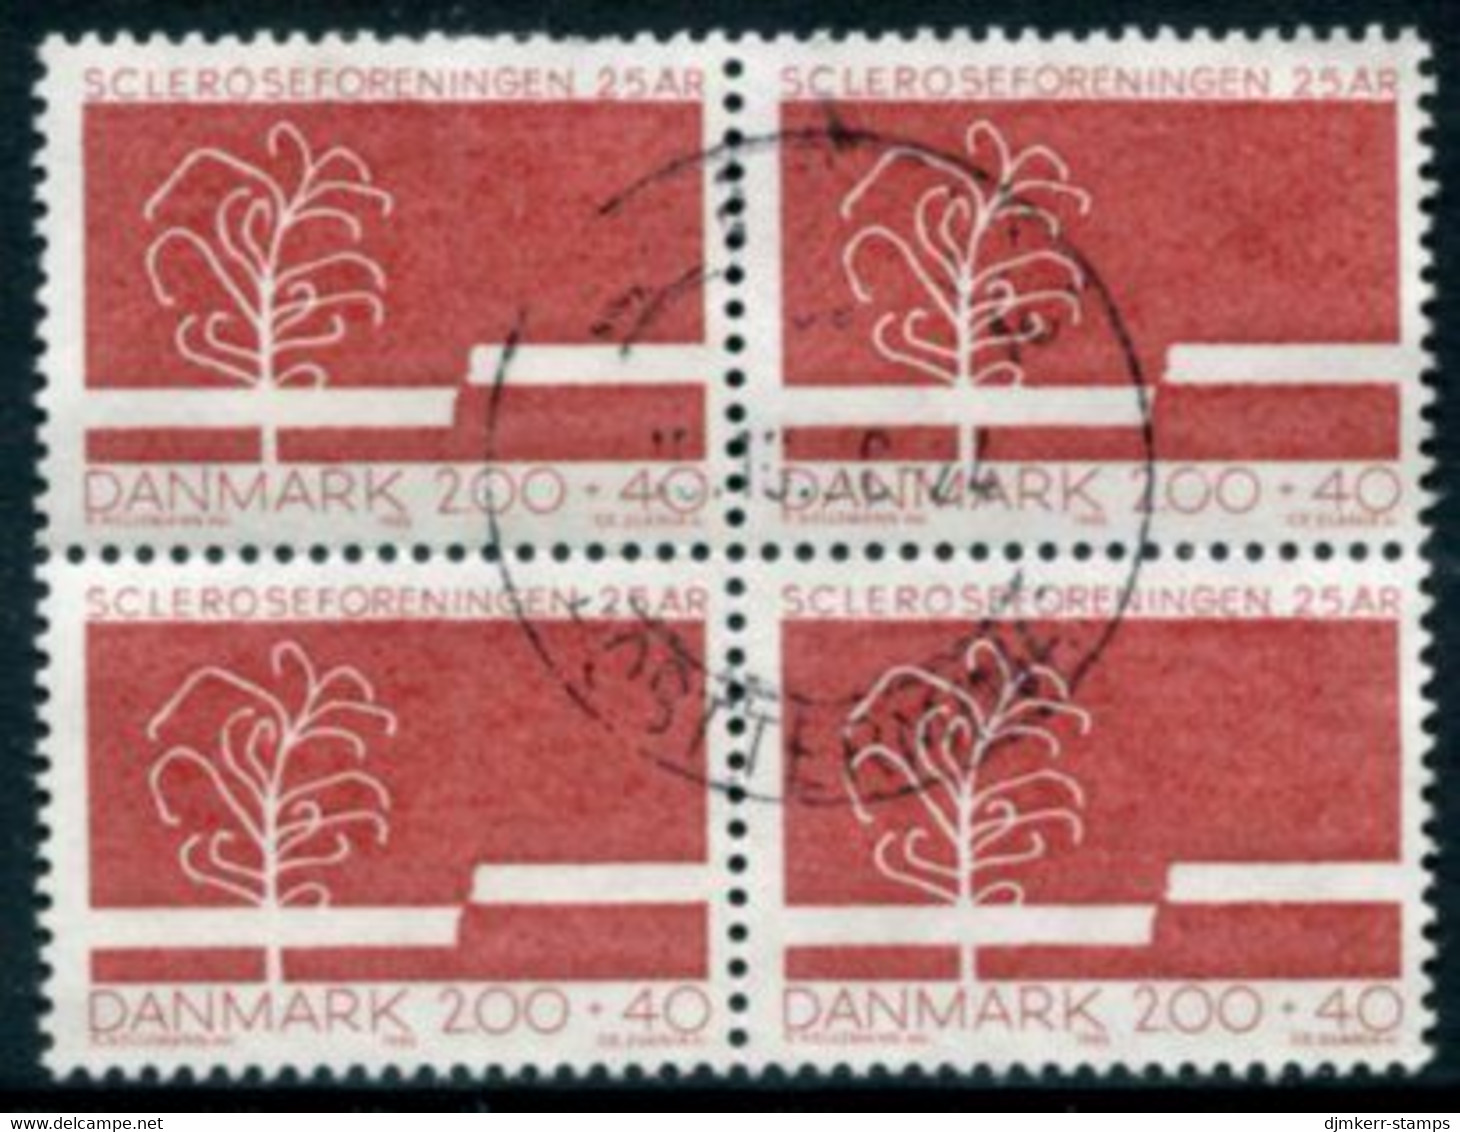 DENMARK 1982 Multiple Sclerosis Charity Block Of 4 Used   Michel 751 - Used Stamps